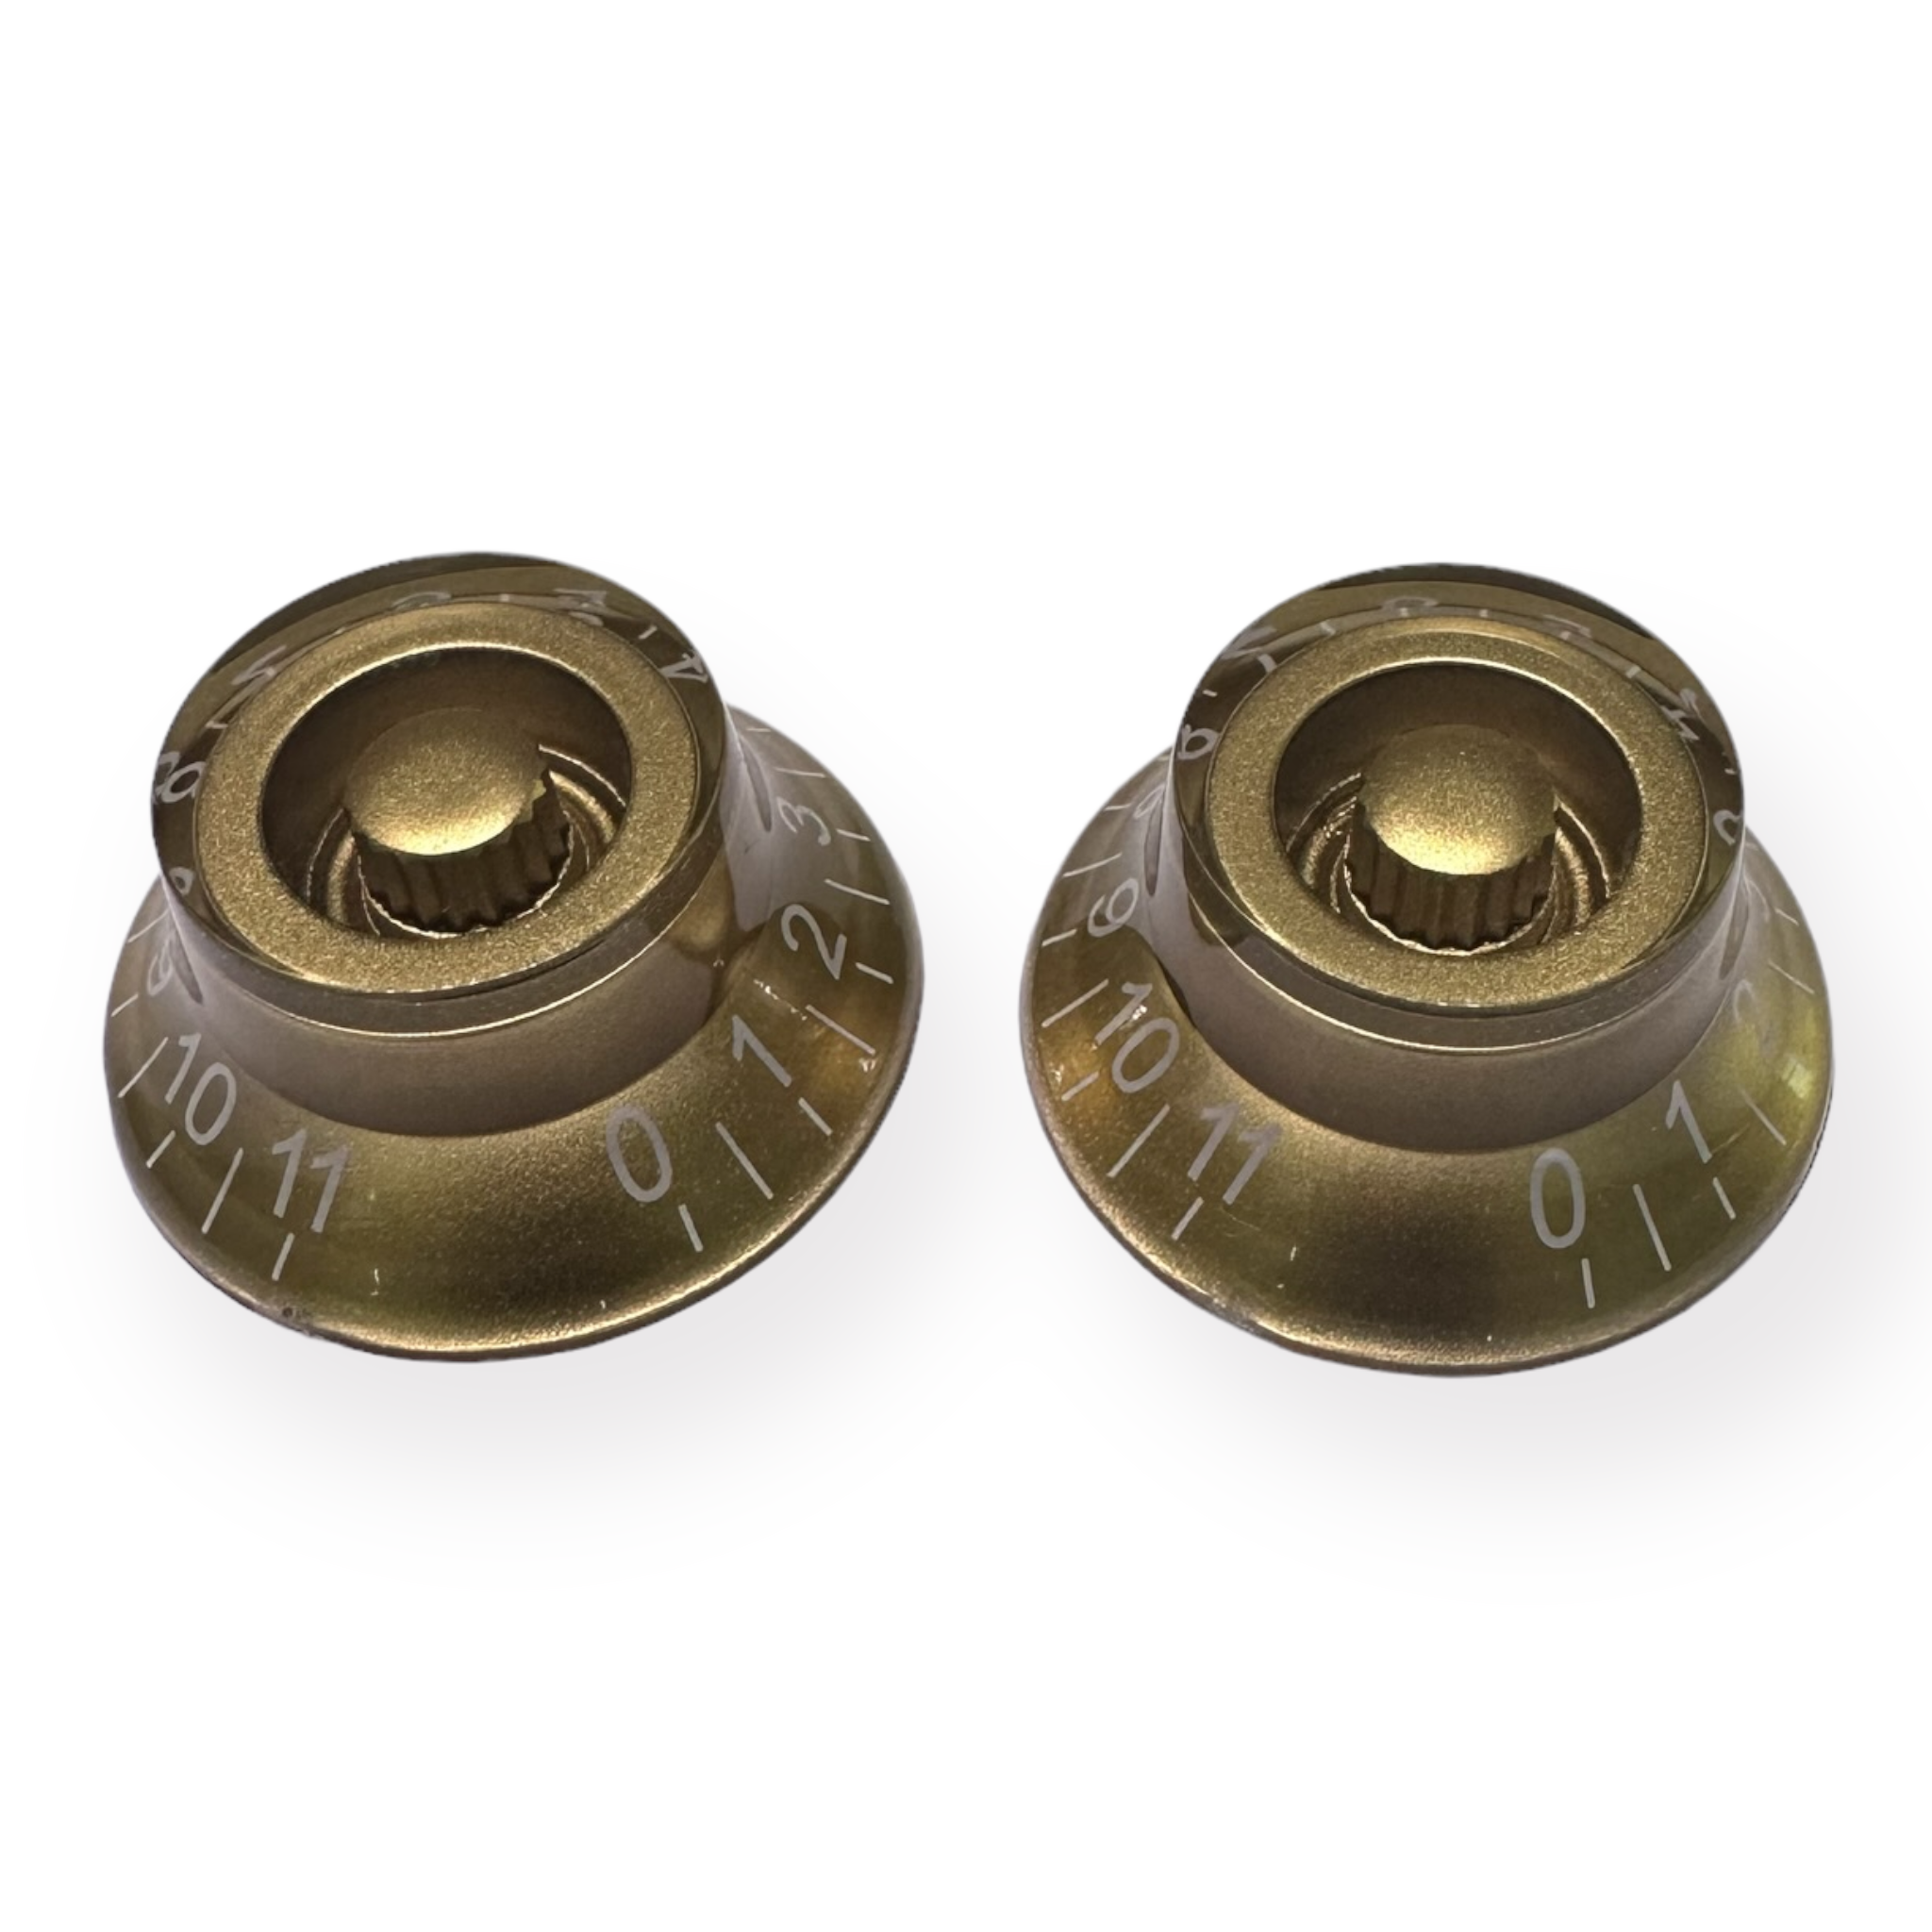 AxLabs Bell Knobs - These Go To 11 (Set of 2) - AxLabs